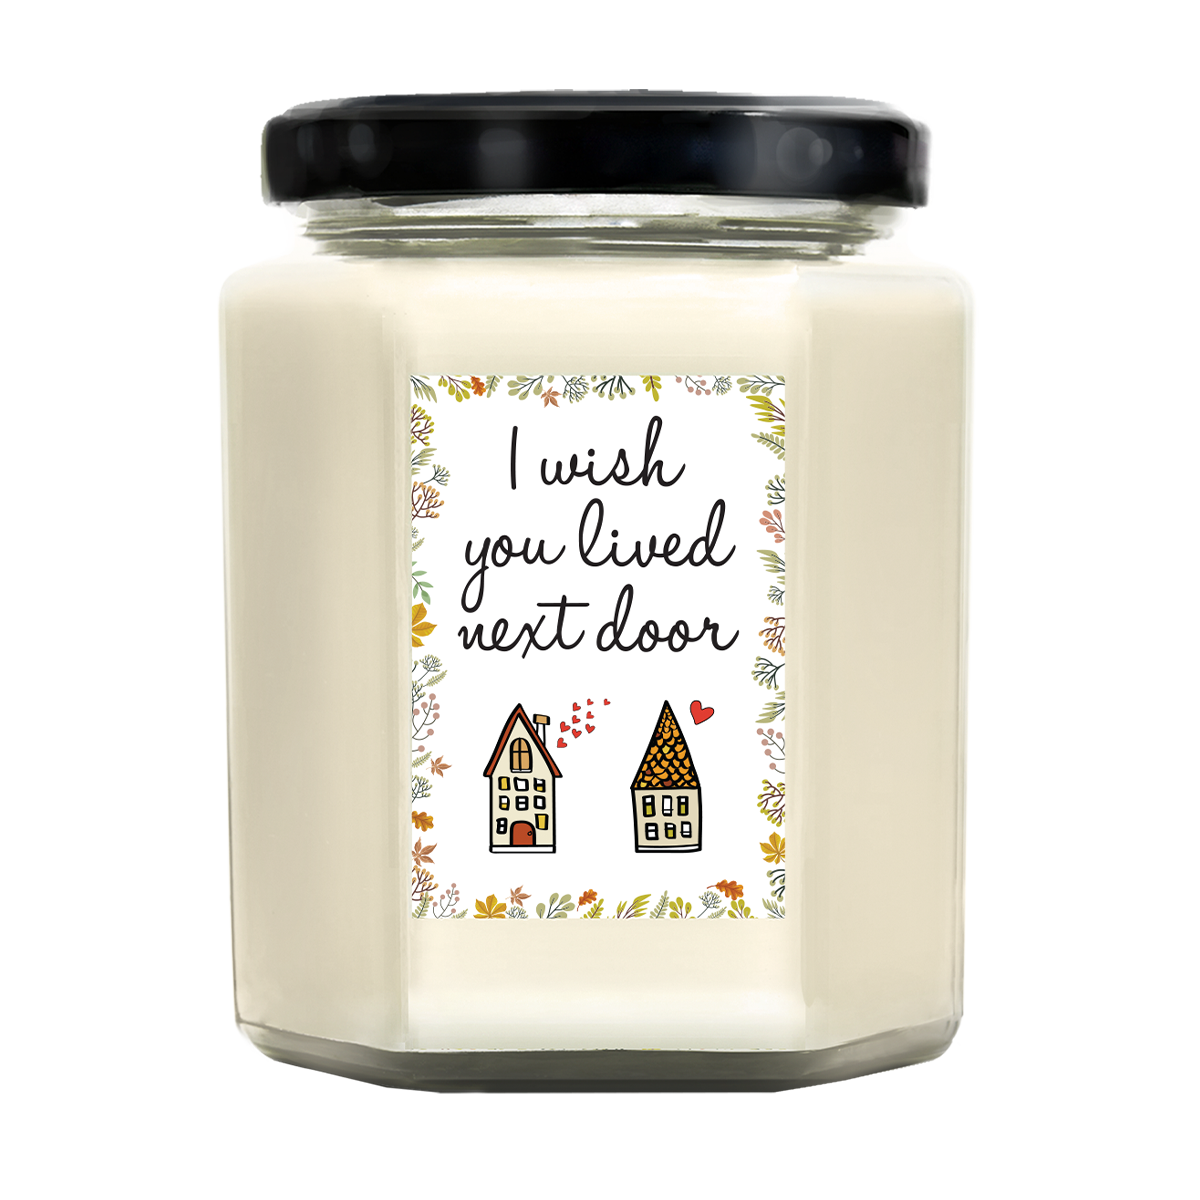 Having Me As A Daughter Is Really The Only Gift You Need” Cedar Teakwood  Candle